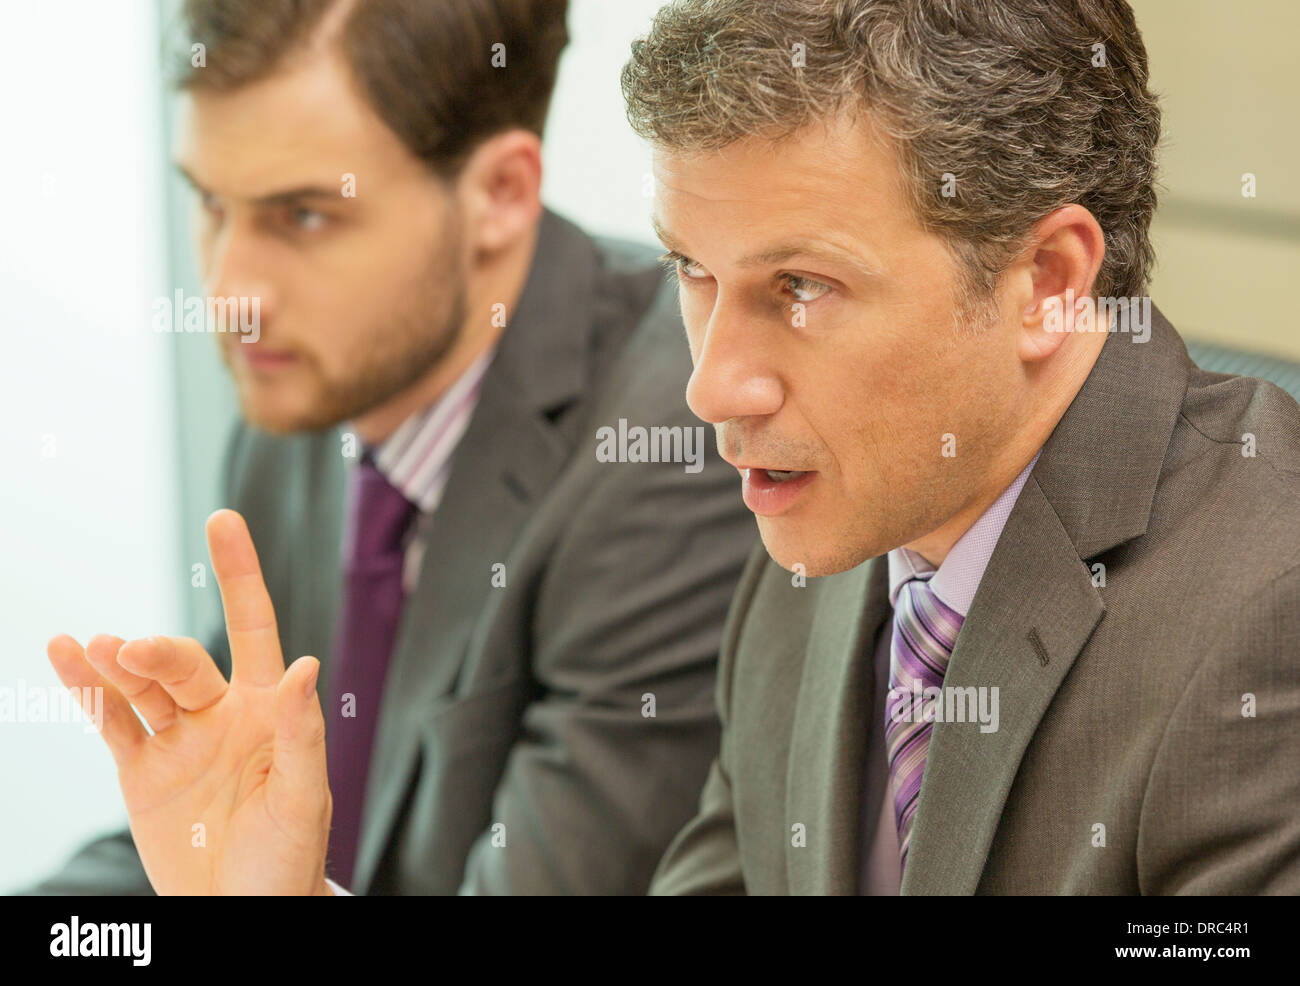 Businessman talking in meeting Banque D'Images